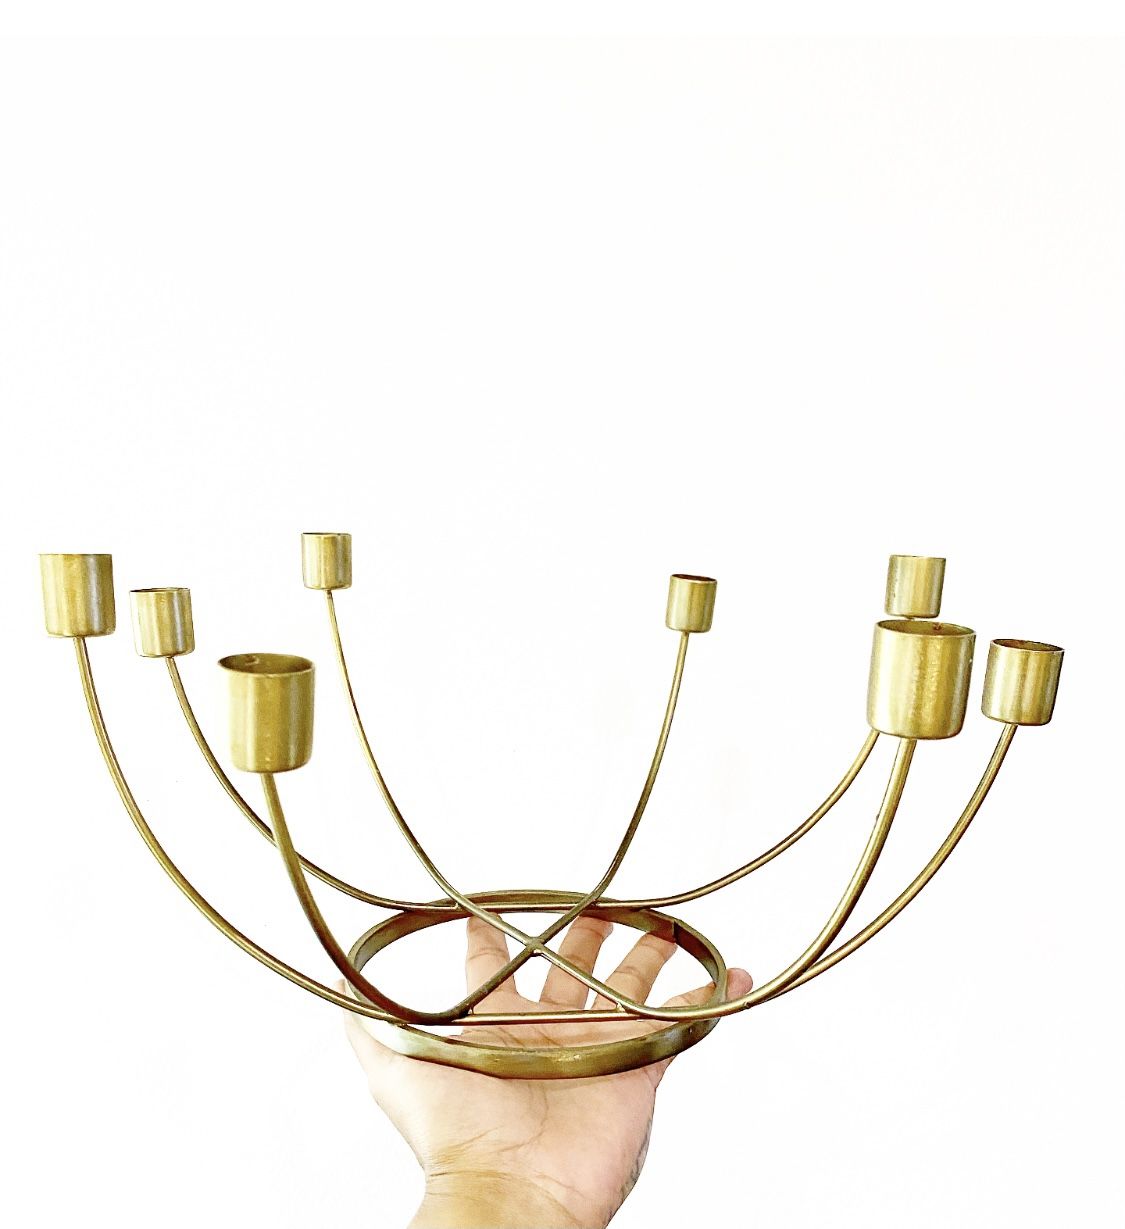 Brass / Gold Candelabra - 15 available, great for weddings or any special event. Also good for general home decor.